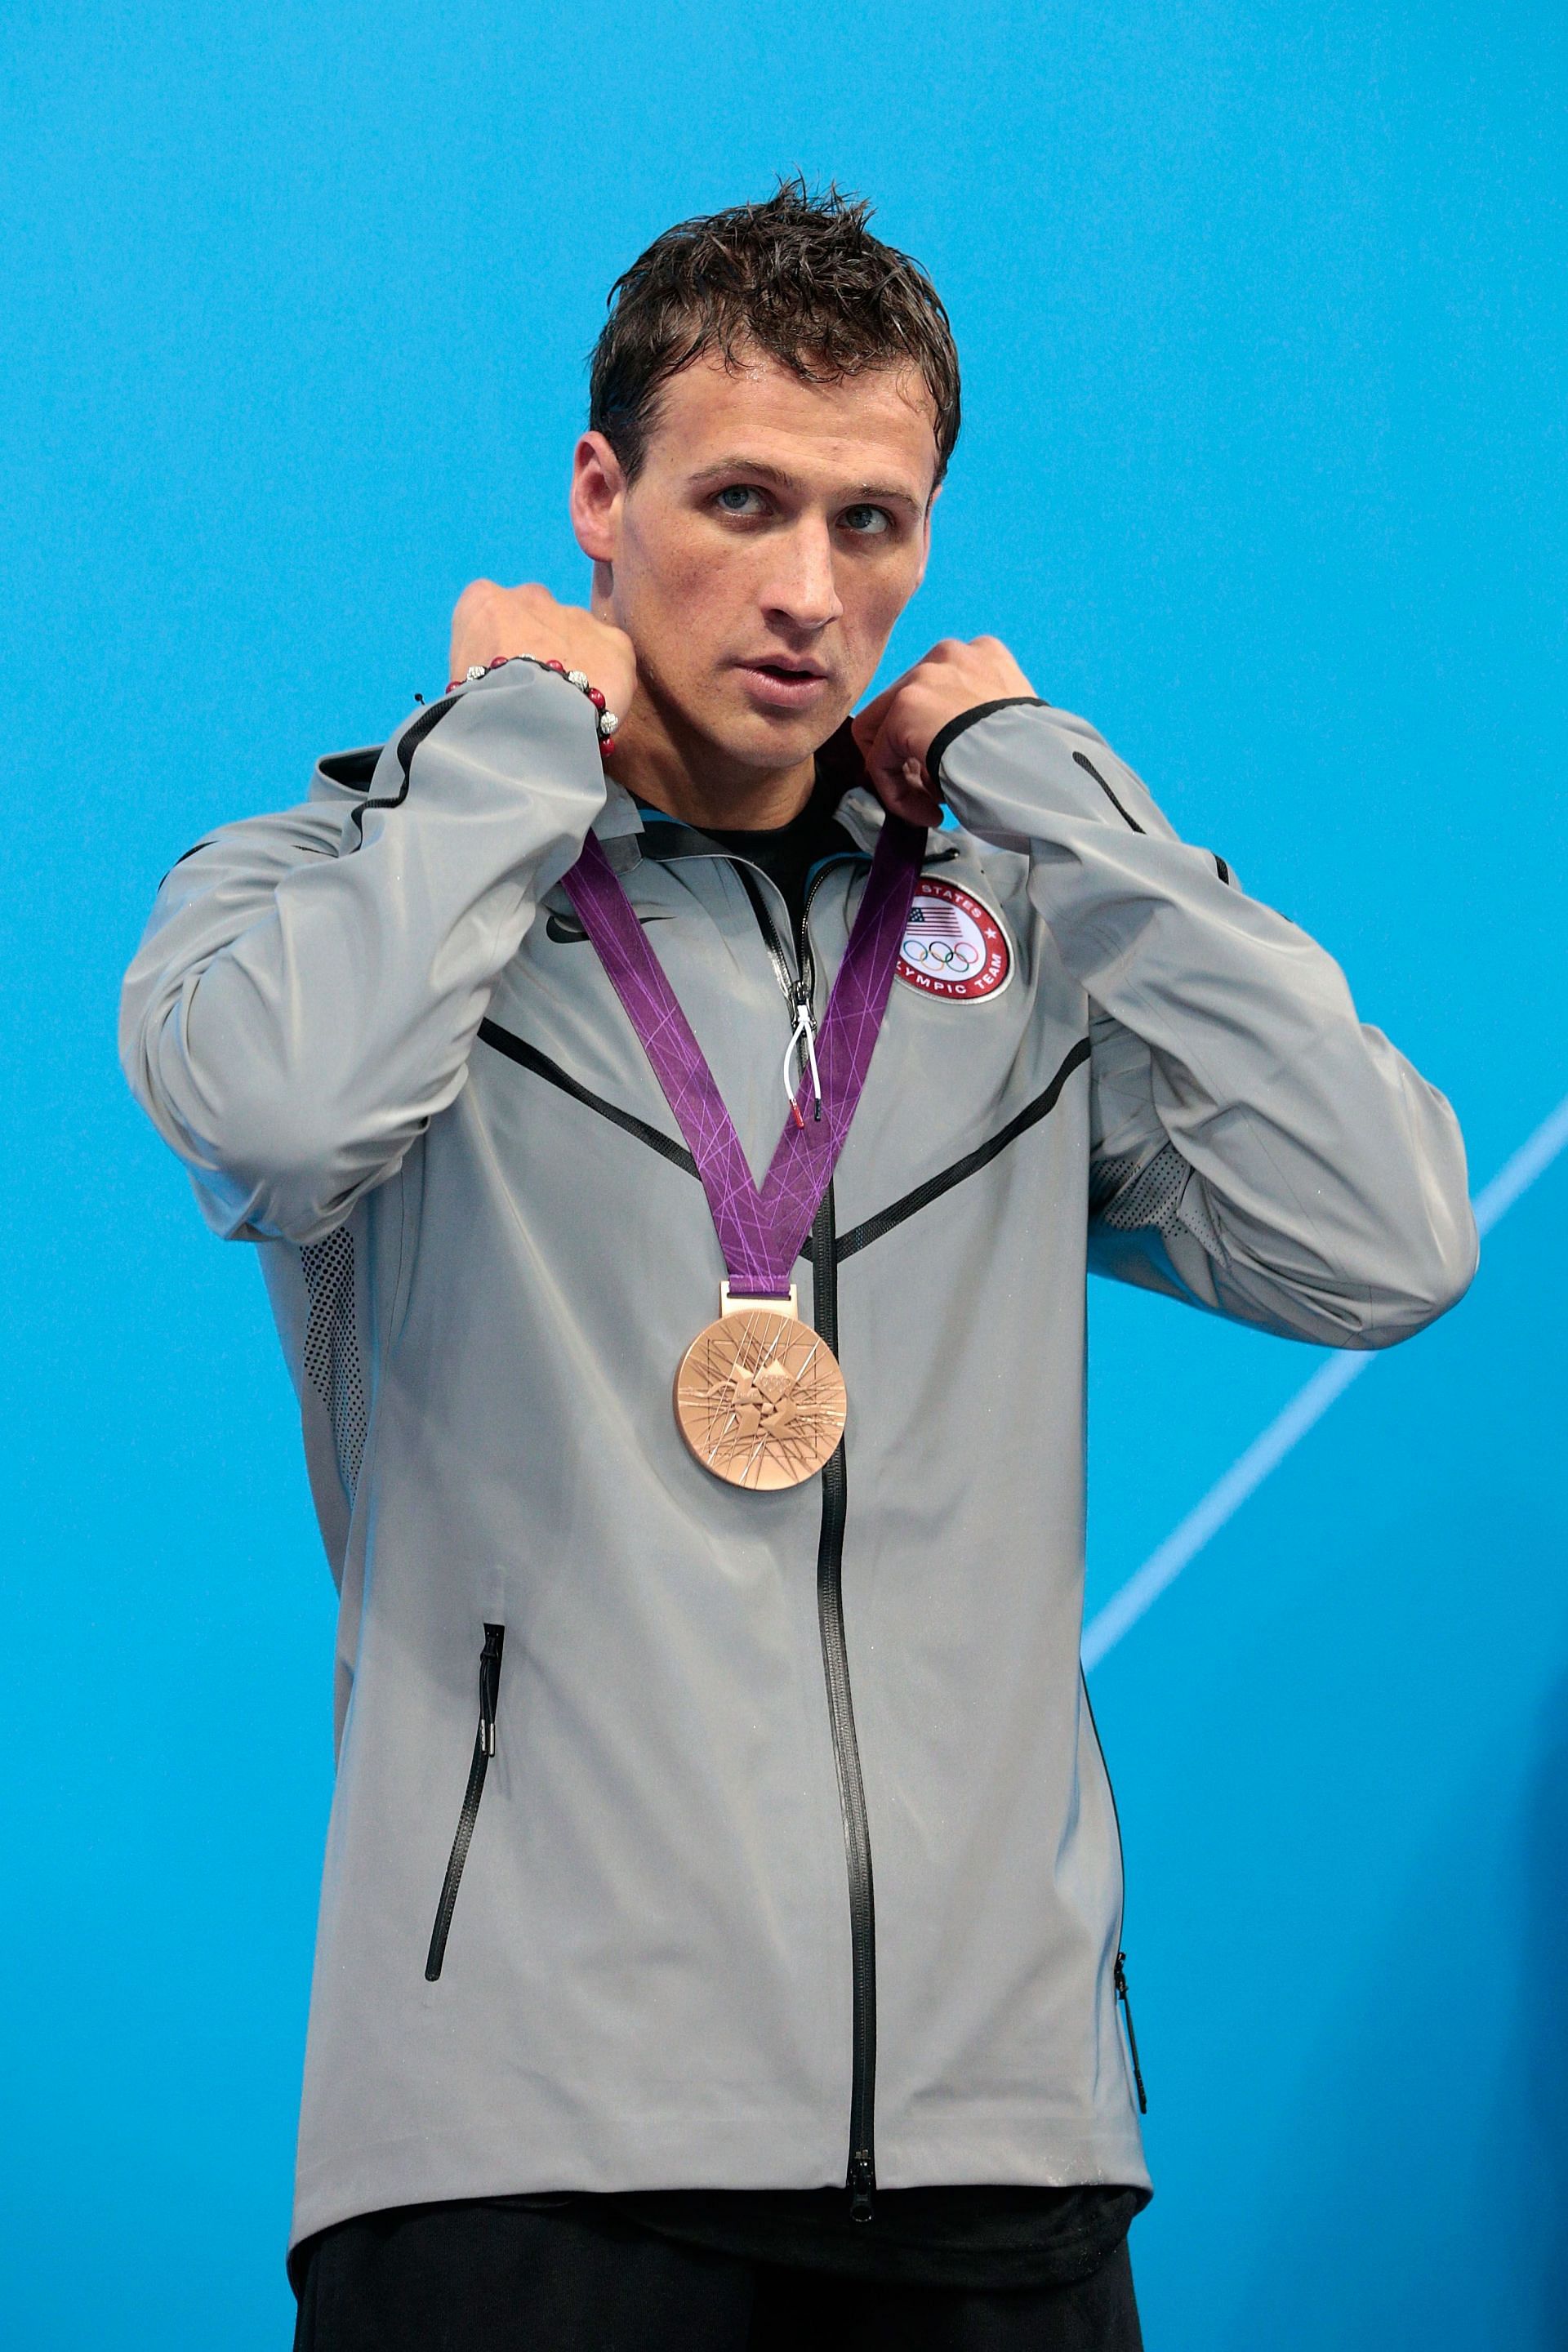 Lochte at the 2012 London Olympics (Photo by Adam Pretty/Getty Images)